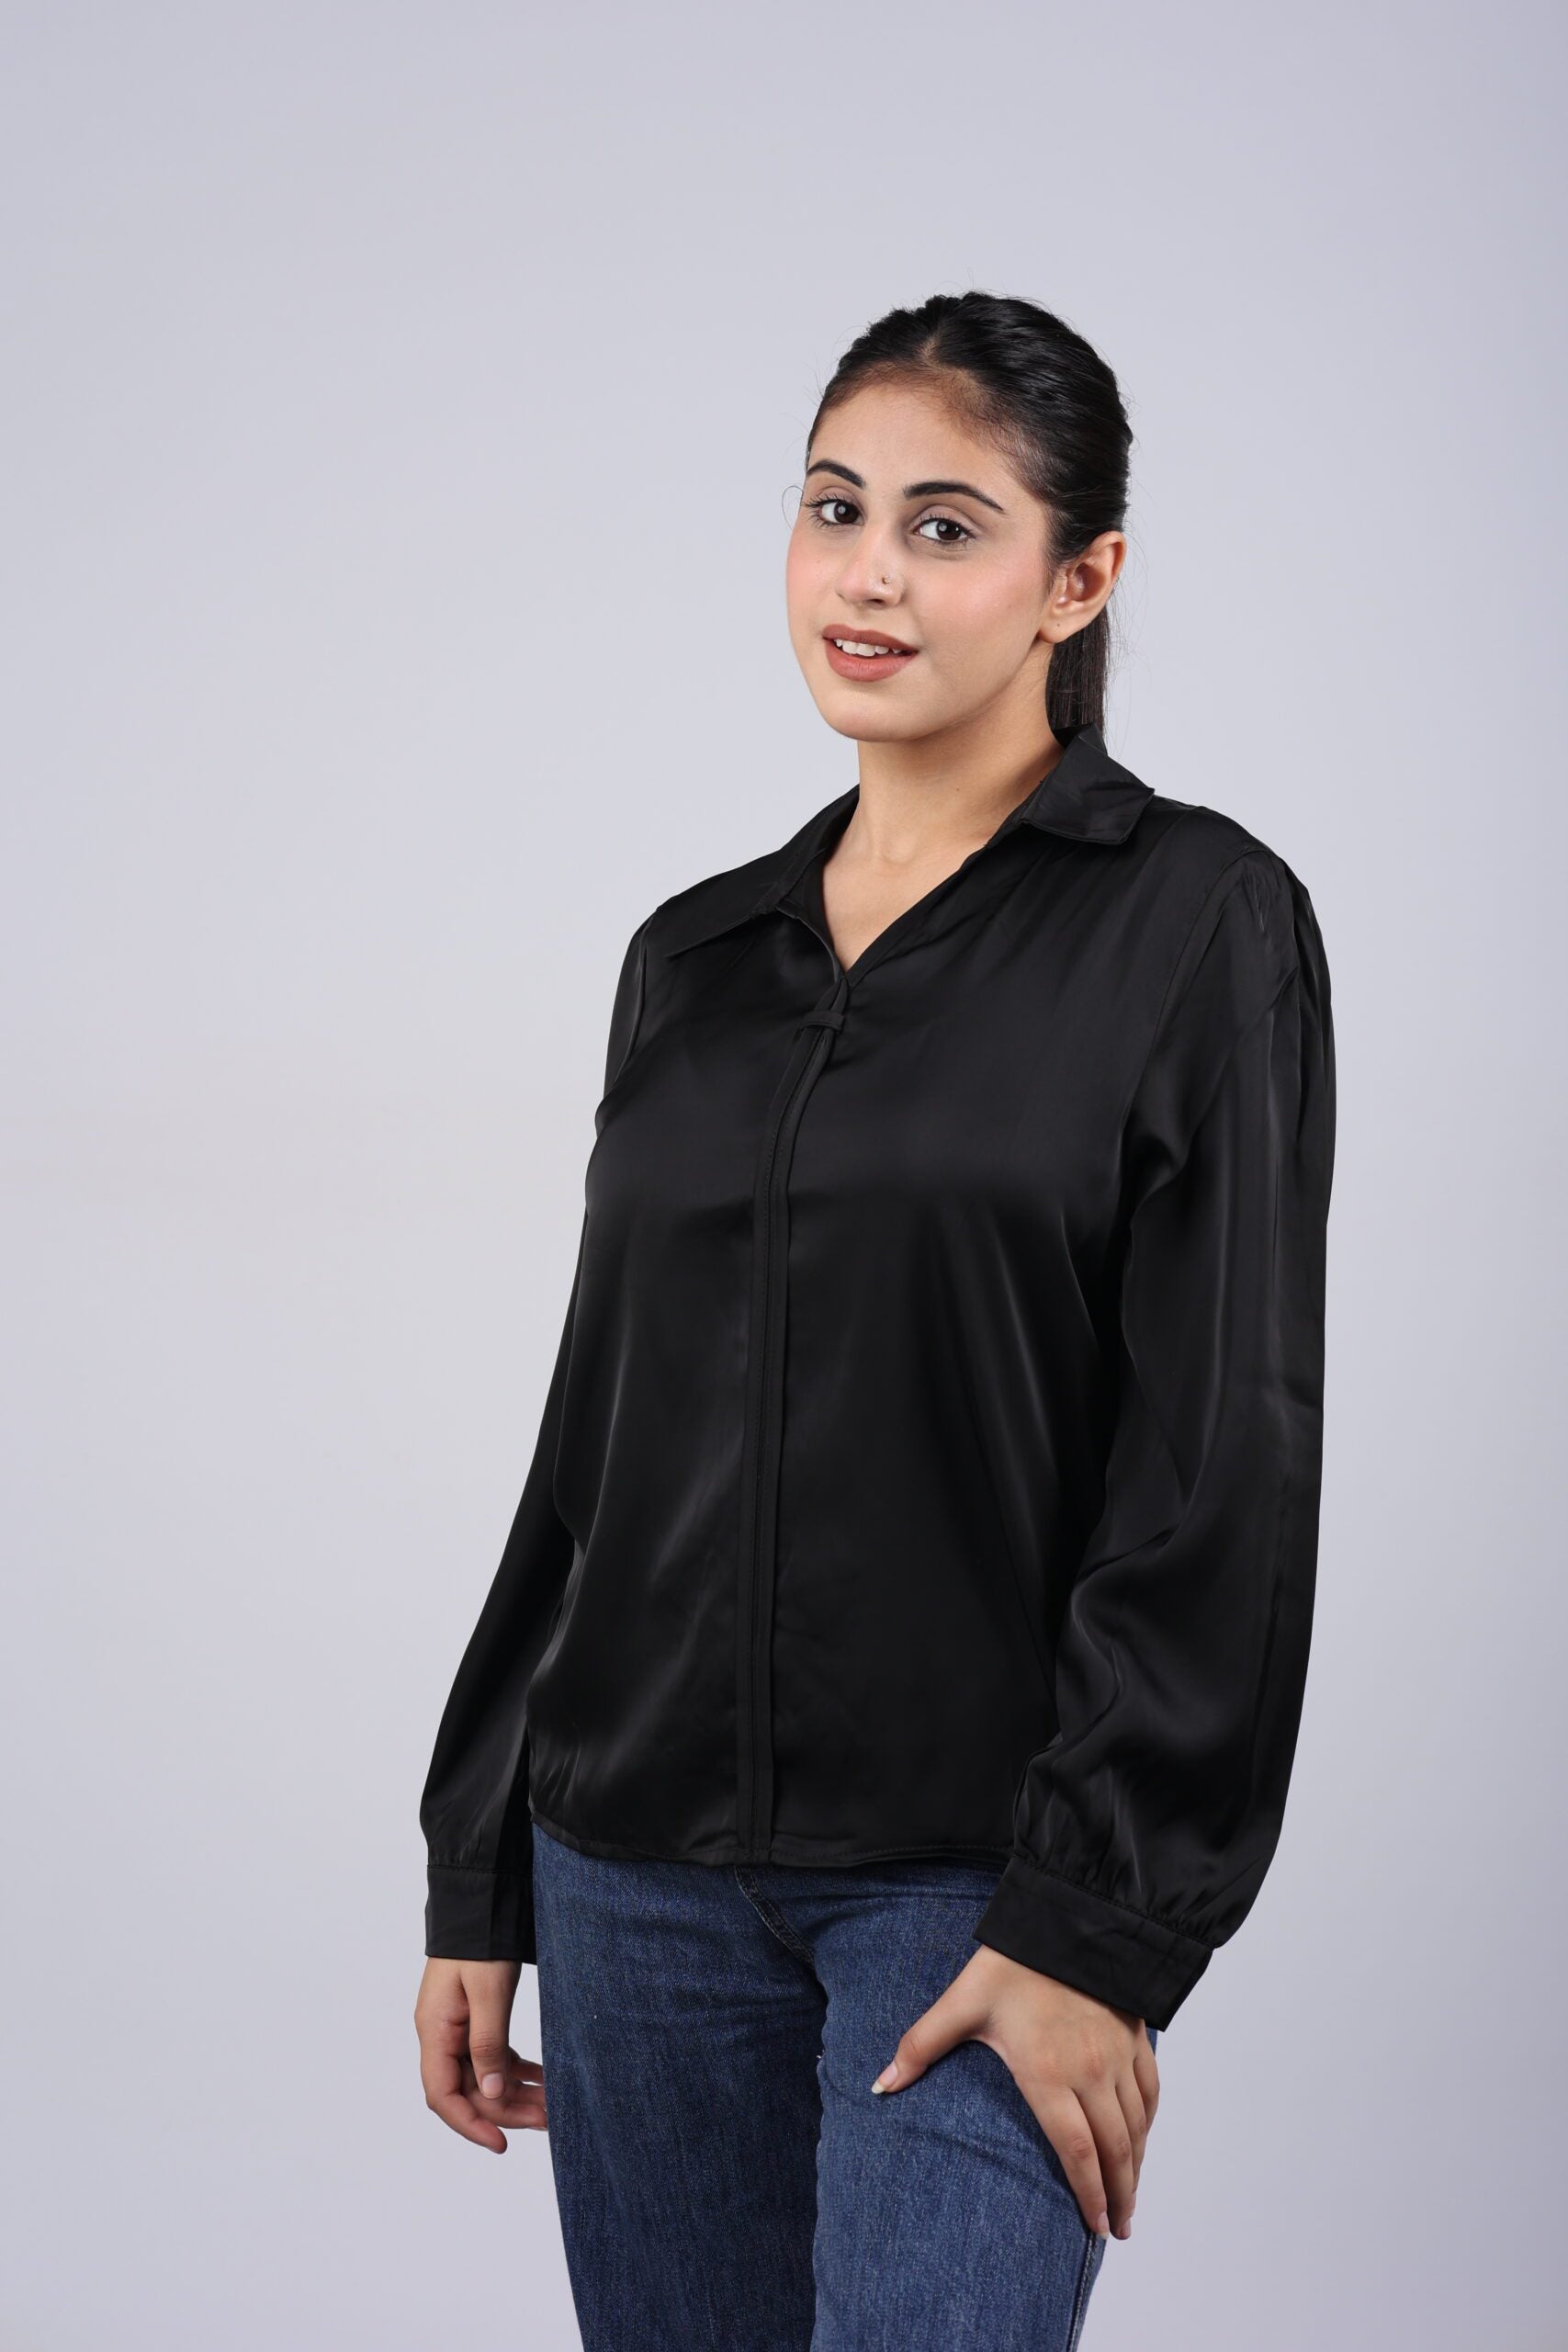 Black Satin Formal/Casual Top - Your Timeless Elegance and Versatility in One!